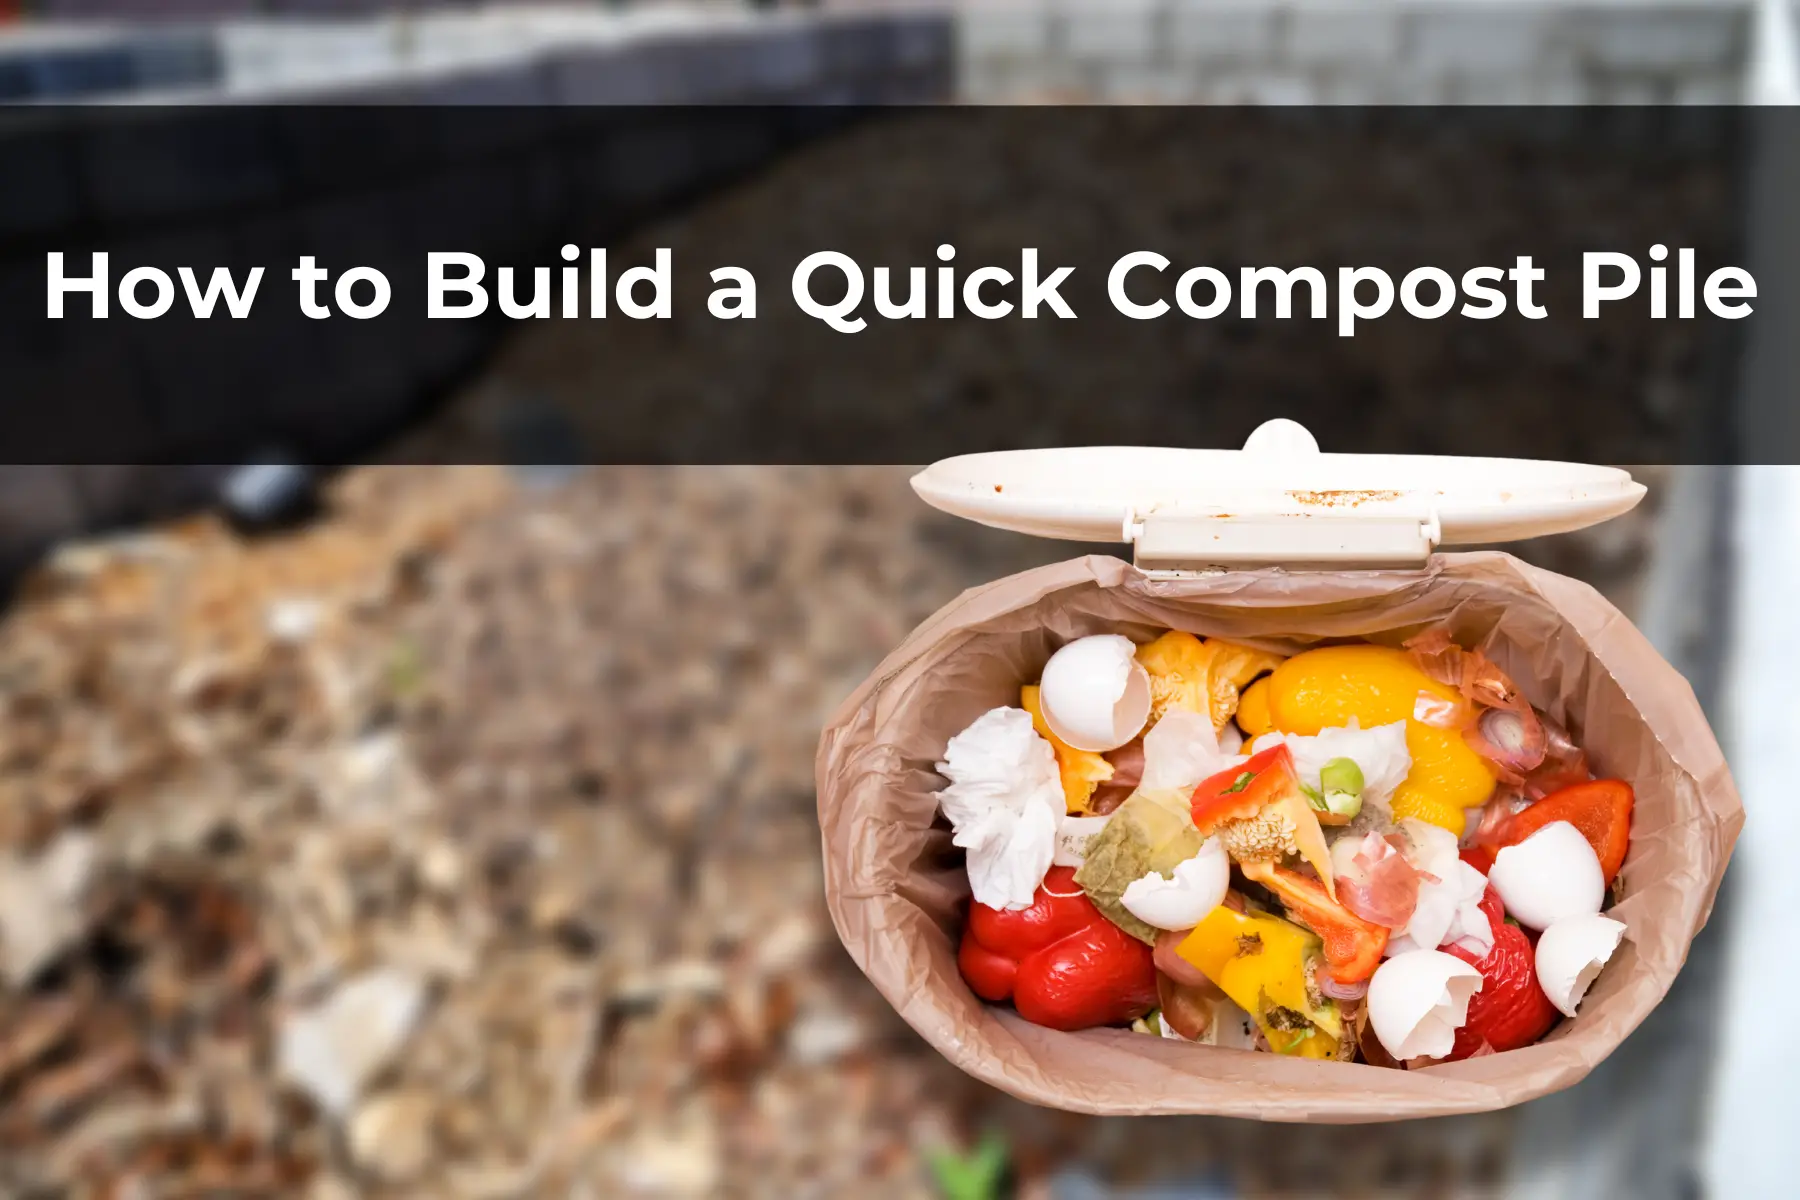 How to Build a Quick Compost Pile